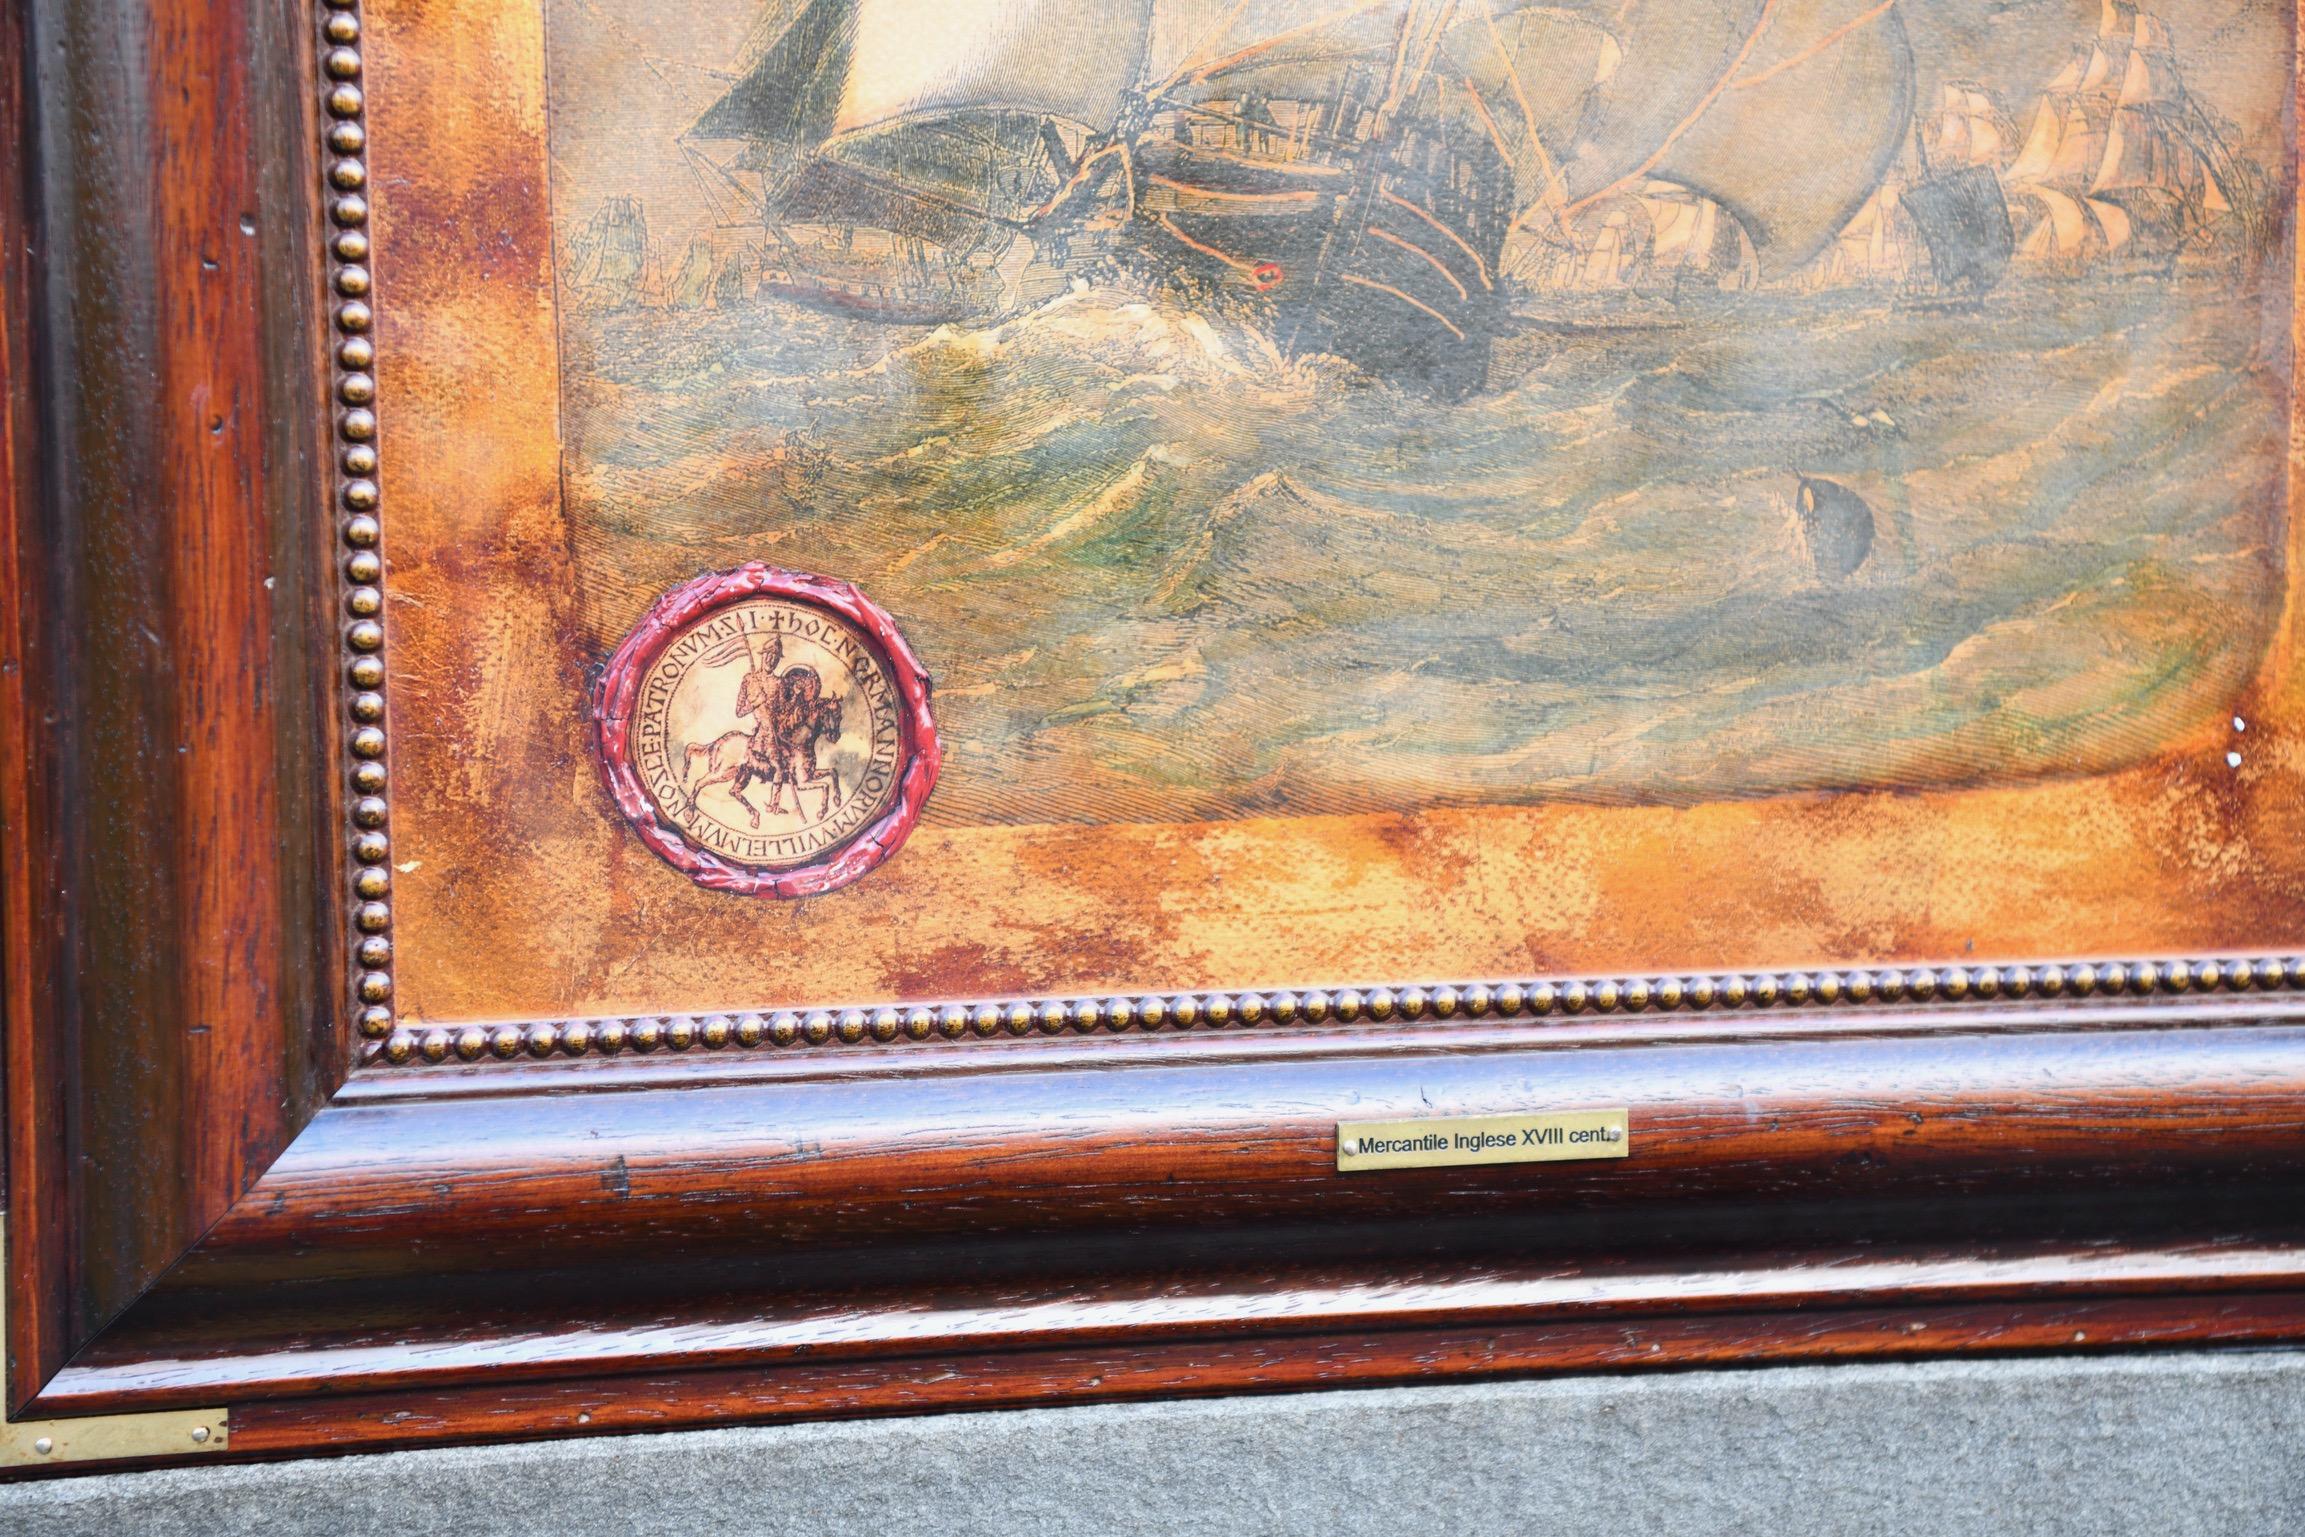 Maltese Hand Painted Replica of Mercantile Inglese XVIII For Sale